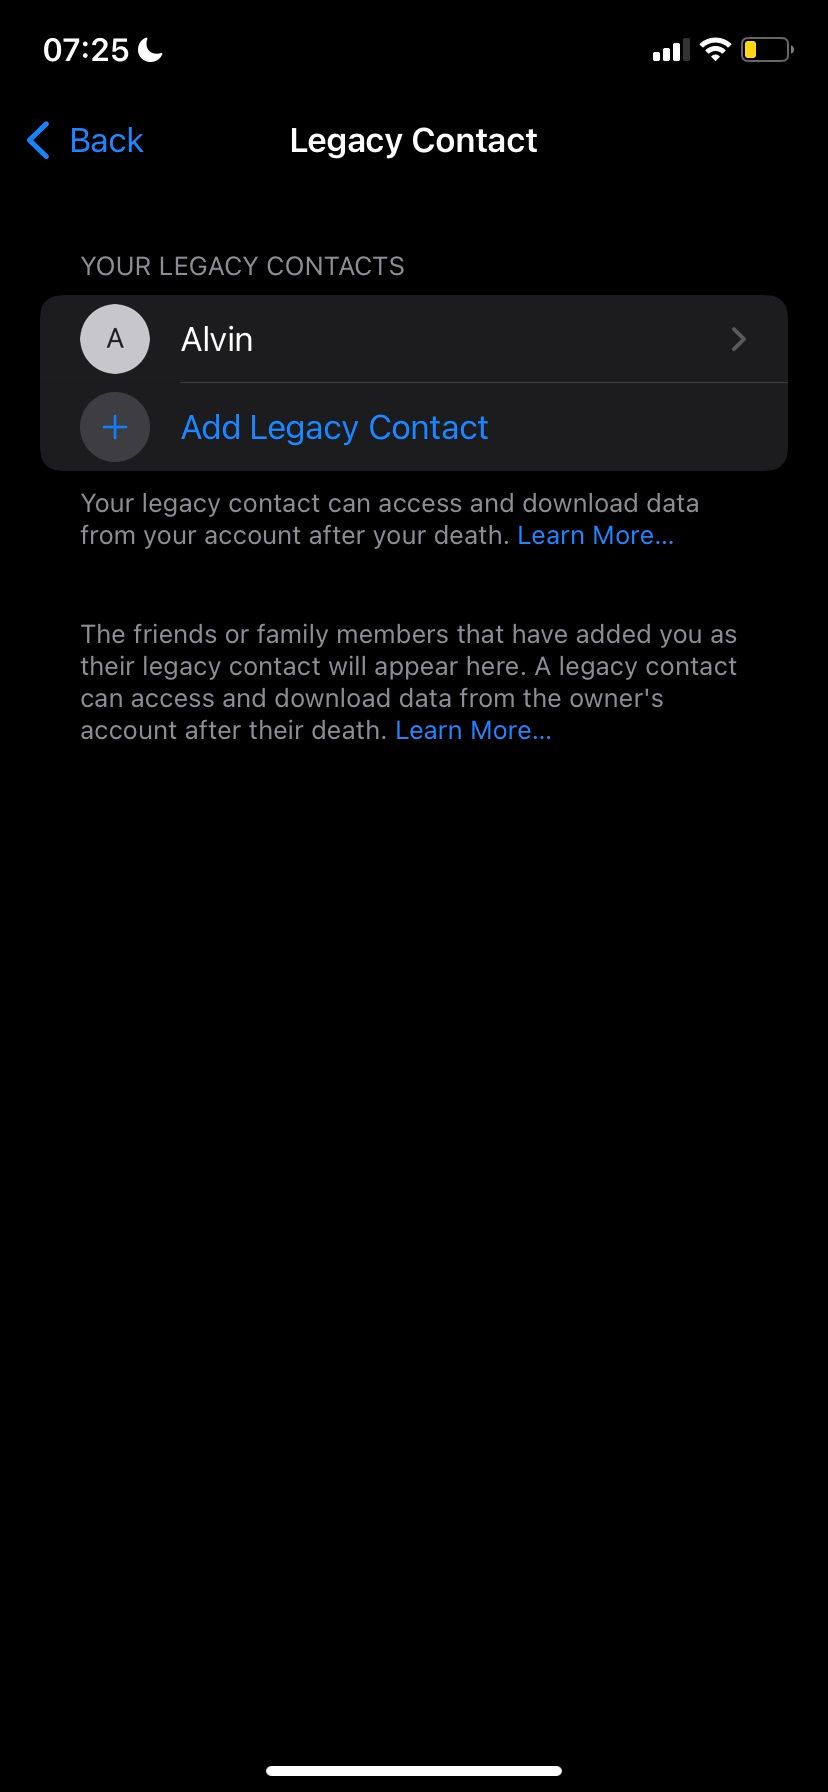 Legacy Contact page in iOS 15